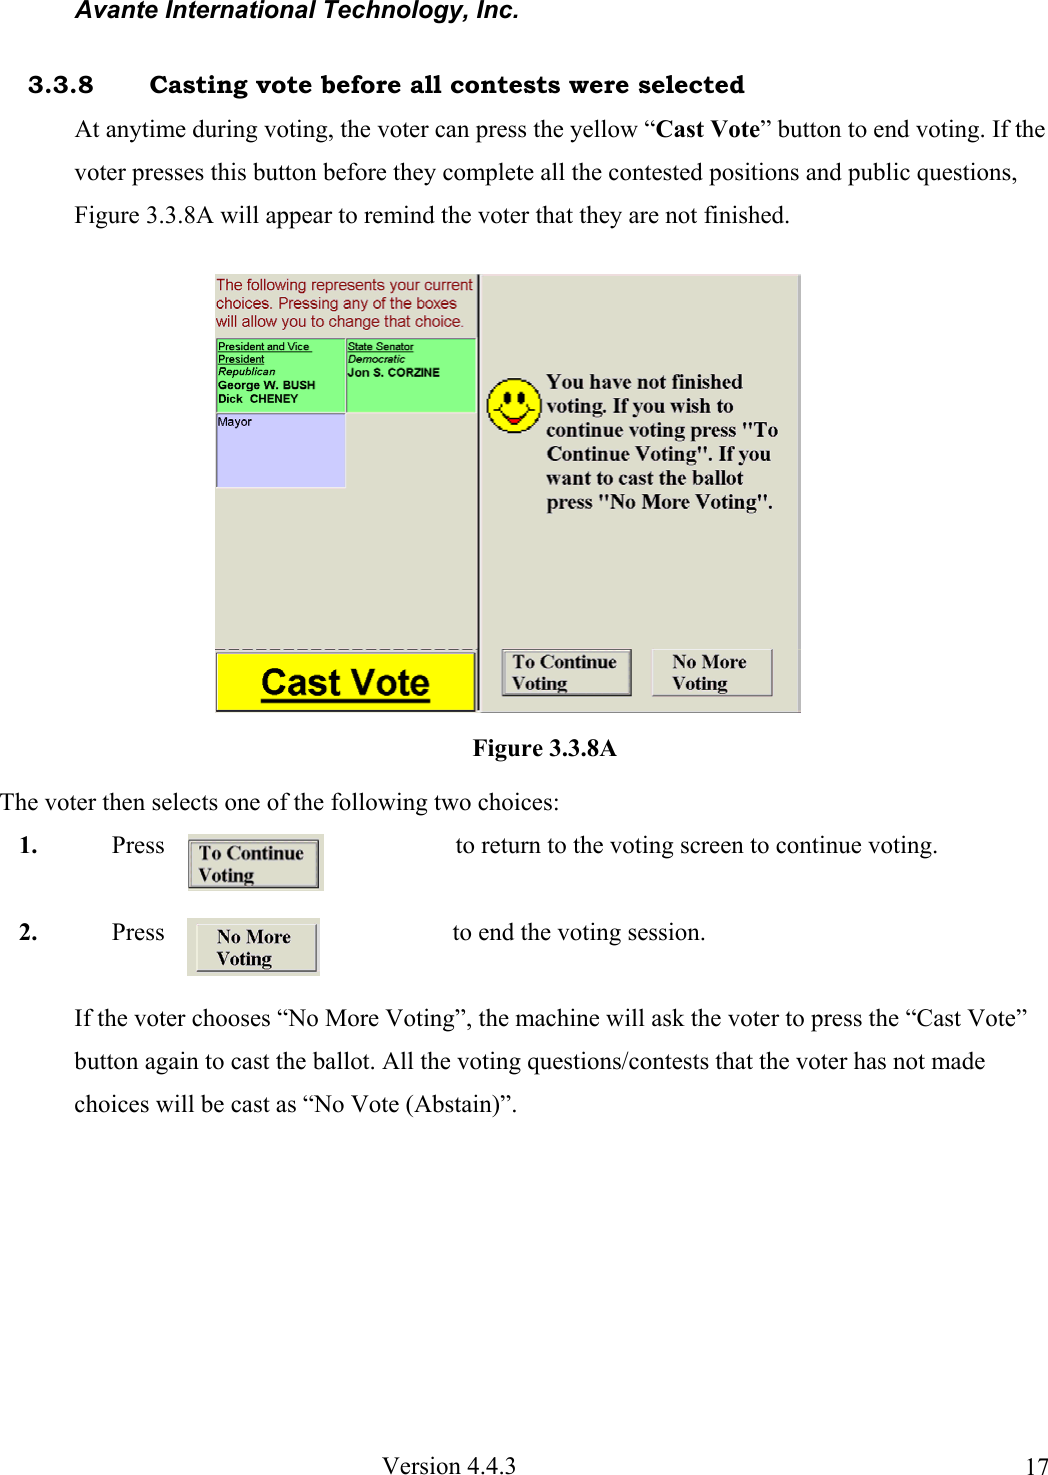 Avante International Technology, Inc.  Version 4.4.3  173.3.8  Casting vote before all contests were selected At anytime during voting, the voter can press the yellow “Cast Vote” button to end voting. If the voter presses this button before they complete all the contested positions and public questions, Figure 3.3.8A will appear to remind the voter that they are not finished. The voter then selects one of the following two choices: 1. Press  to return to the voting screen to continue voting. 2. Press  to end the voting session. If the voter chooses “No More Voting”, the machine will ask the voter to press the “Cast Vote” button again to cast the ballot. All the voting questions/contests that the voter has not made choices will be cast as “No Vote (Abstain)”. Figure 3.3.8A 